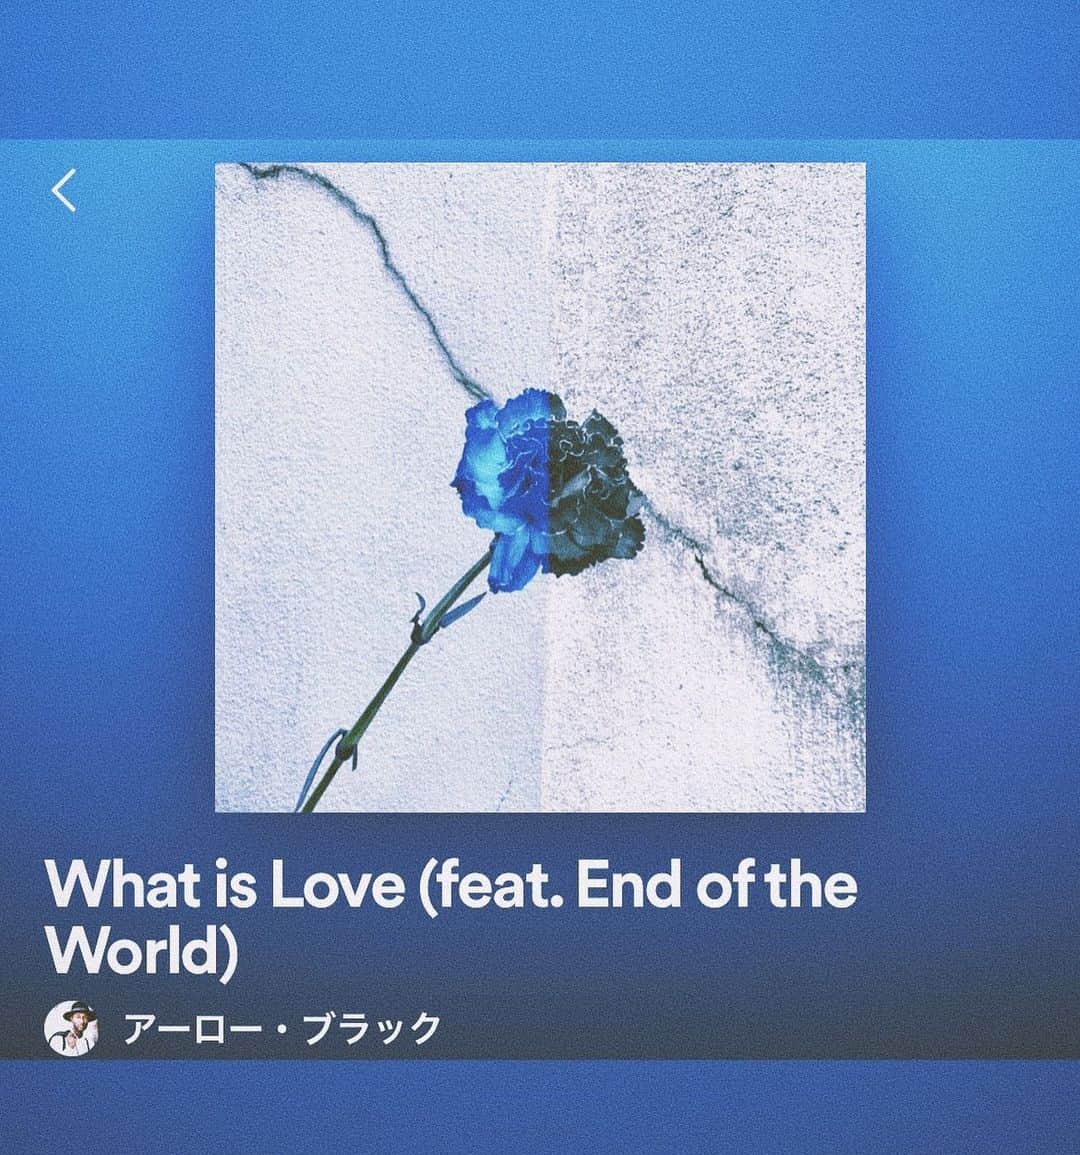 Saoriさんのインスタグラム写真 - (SaoriInstagram)「I wrote this song during a really difficult time. Like everyone else, covid altered my whole life.   I couldn’t do the things I wanted to and couldn’t be near the people I cared about most.   Not being able to be around loved ones really made me think about the meaning of love itself.  I just kept thinking “what is love?”,  over and over.  That’s how this song came about, and writing it helped me so much.  Incredibly, Aloe Blacc loved the lyrics and lent his amazing voice to the song! I can’t thank him enough.  It’s a really important song for me.  この曲を作った時、 精神的に追い詰められていました。  コロナウィルスの蔓延によって今までのルーティンが崩れ、良かれと思ってやったことすら上手くいかず、仲間とも家族とも、良い関係を作るのが難しい時期でした。  What is Love? は、 その時の私の大きなテーマでした。 大事な人のそばにいることが辛い時、 愛とは何なのかと考えました。  そんな歌詞です。  信じられないことに、 アローブラックが私とプロデューサーで作った歌詞を気に入ってくれて、歌いたいと言ってくれました。  アローブラックが？？ あのアローブラックが？？  そう、あのアローブラックが、素晴らしい歌声で歌ってくれました。  大切な曲です。 ____  そして、End of the worldの 新曲を楽しみにしていてくれた皆さん、 延期の発表が遅すぎてごめんなさい。  運営チームに、コラー！！ って言いました。 発表どんだけ遅いねんっ！！ って言いました。  しばしお待ちを。」6月24日 17時50分 - saori_fujisaki